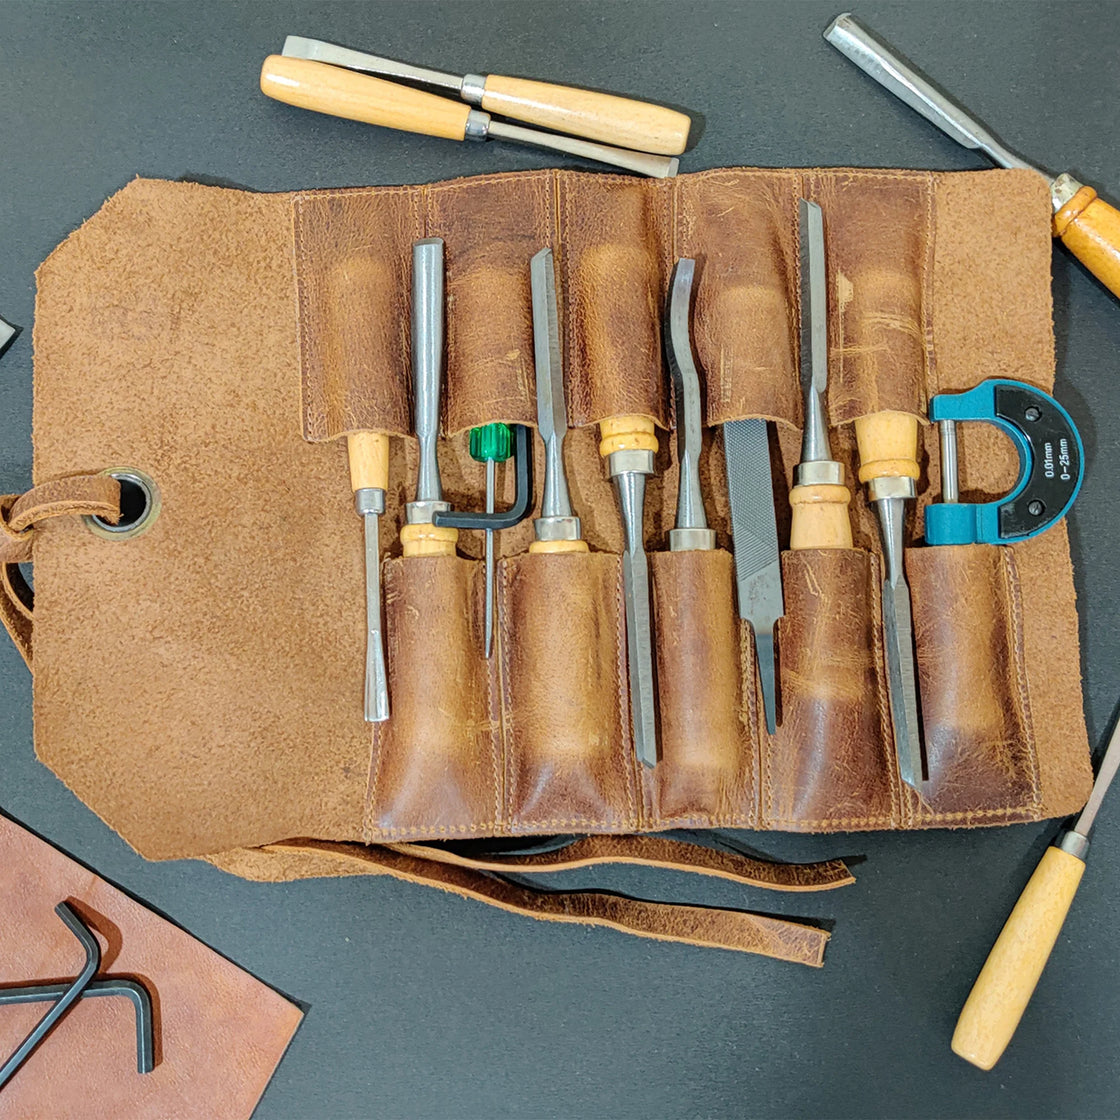 Wood carving tool roll